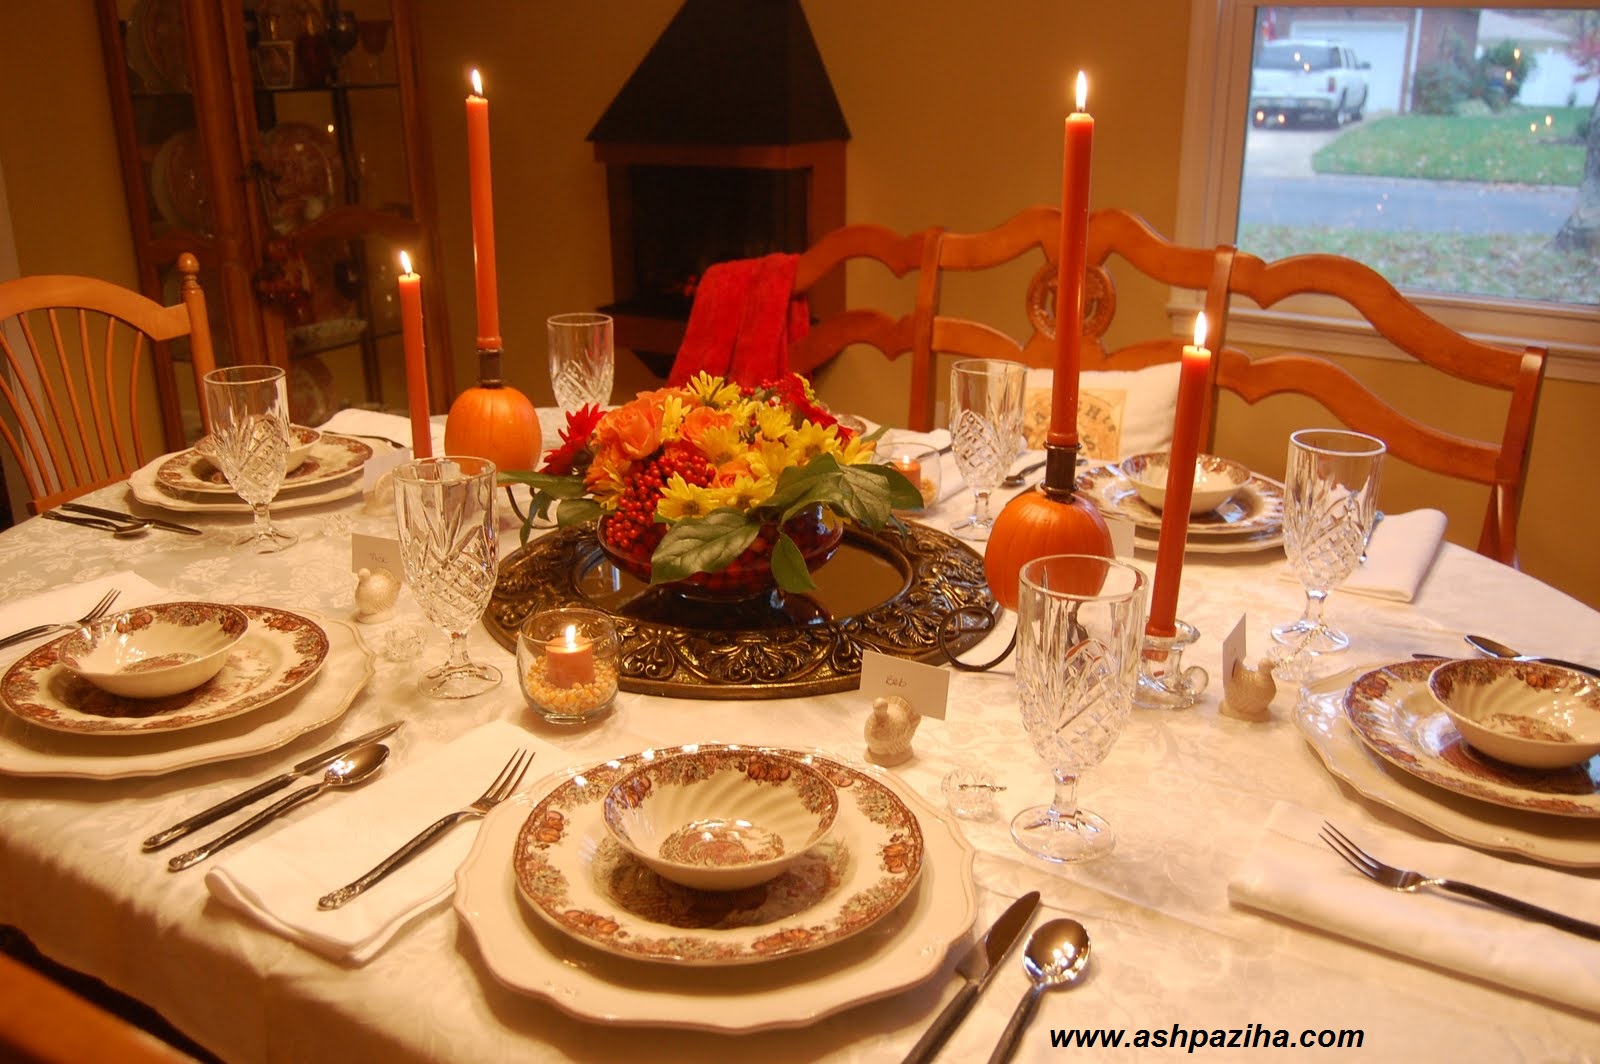 Examples of - decoration - and - Layouts - table - food (10)